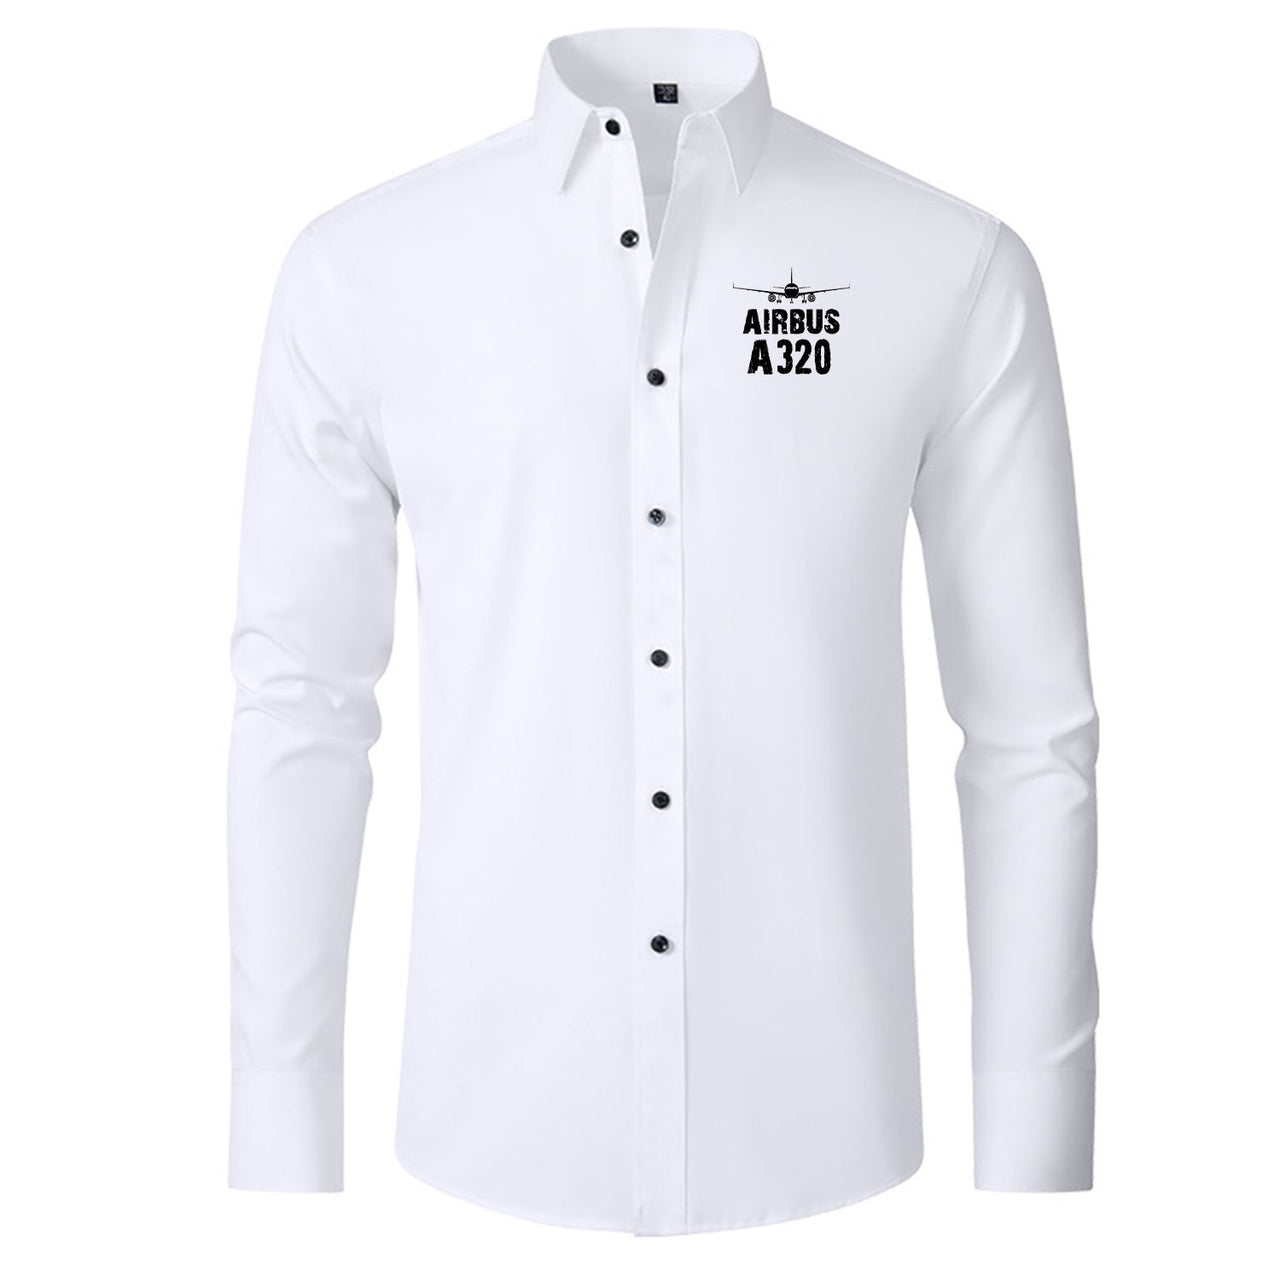 Airbus A320 & Plane Designed Long Sleeve Shirts